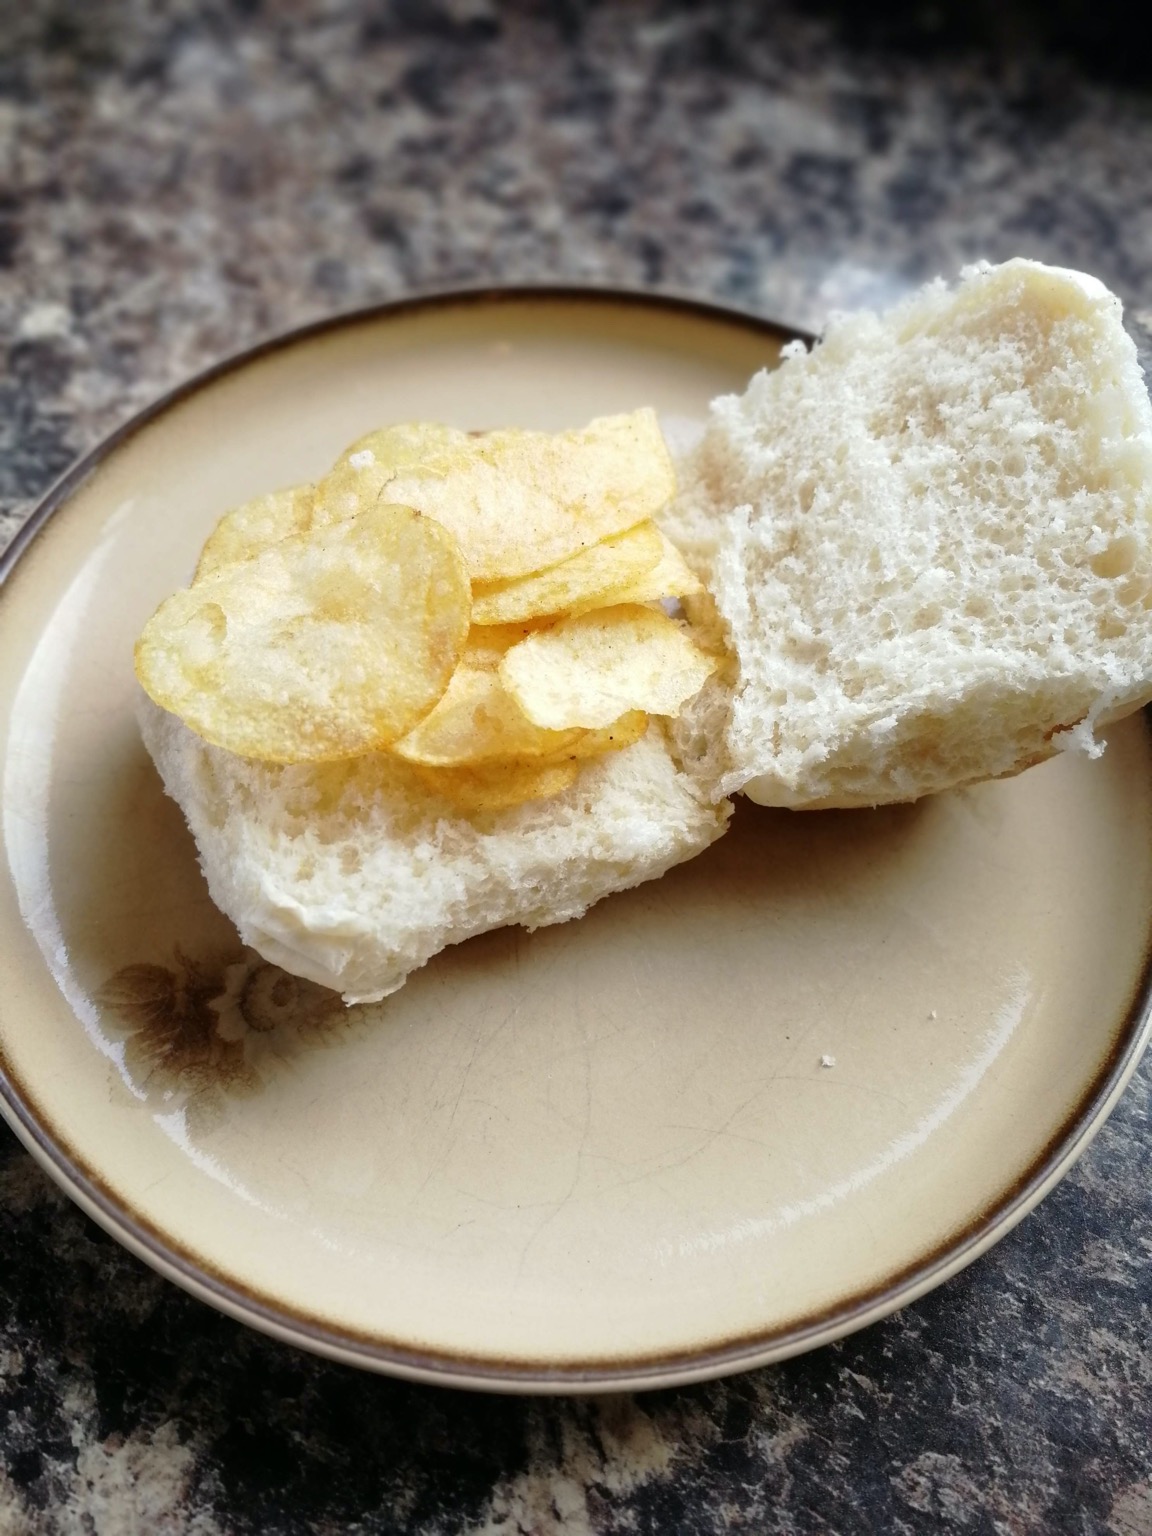 Open white roll with potato crisps placed on it